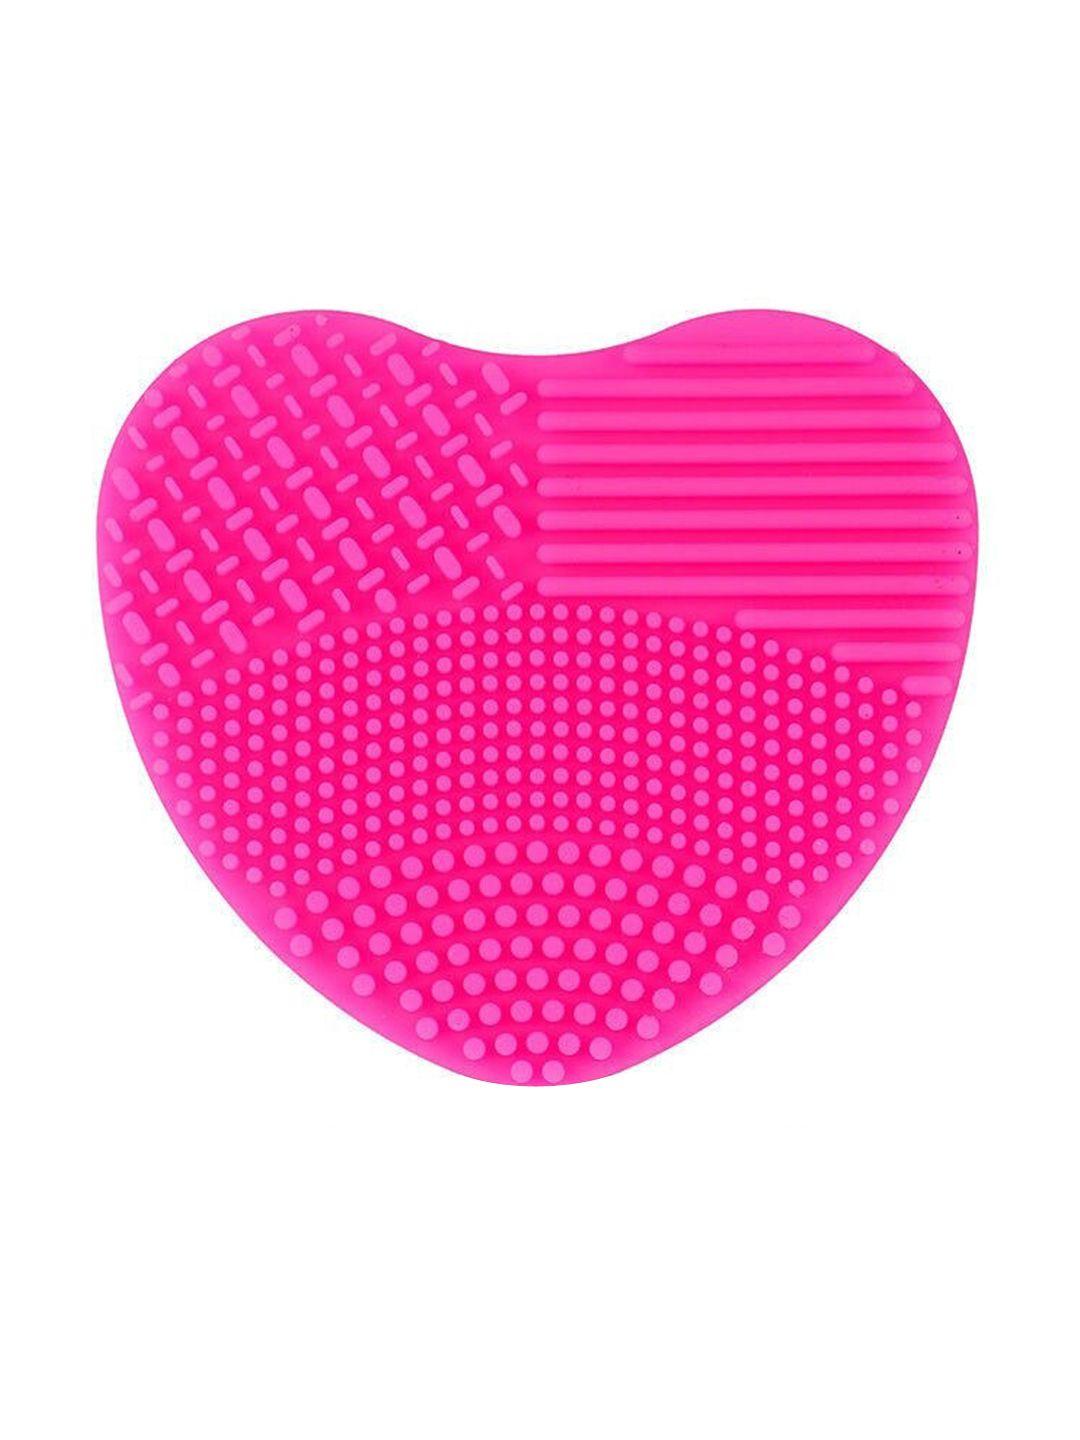 feelhigh heart shape portable silicone makeup brush cleaner scrubber - pink